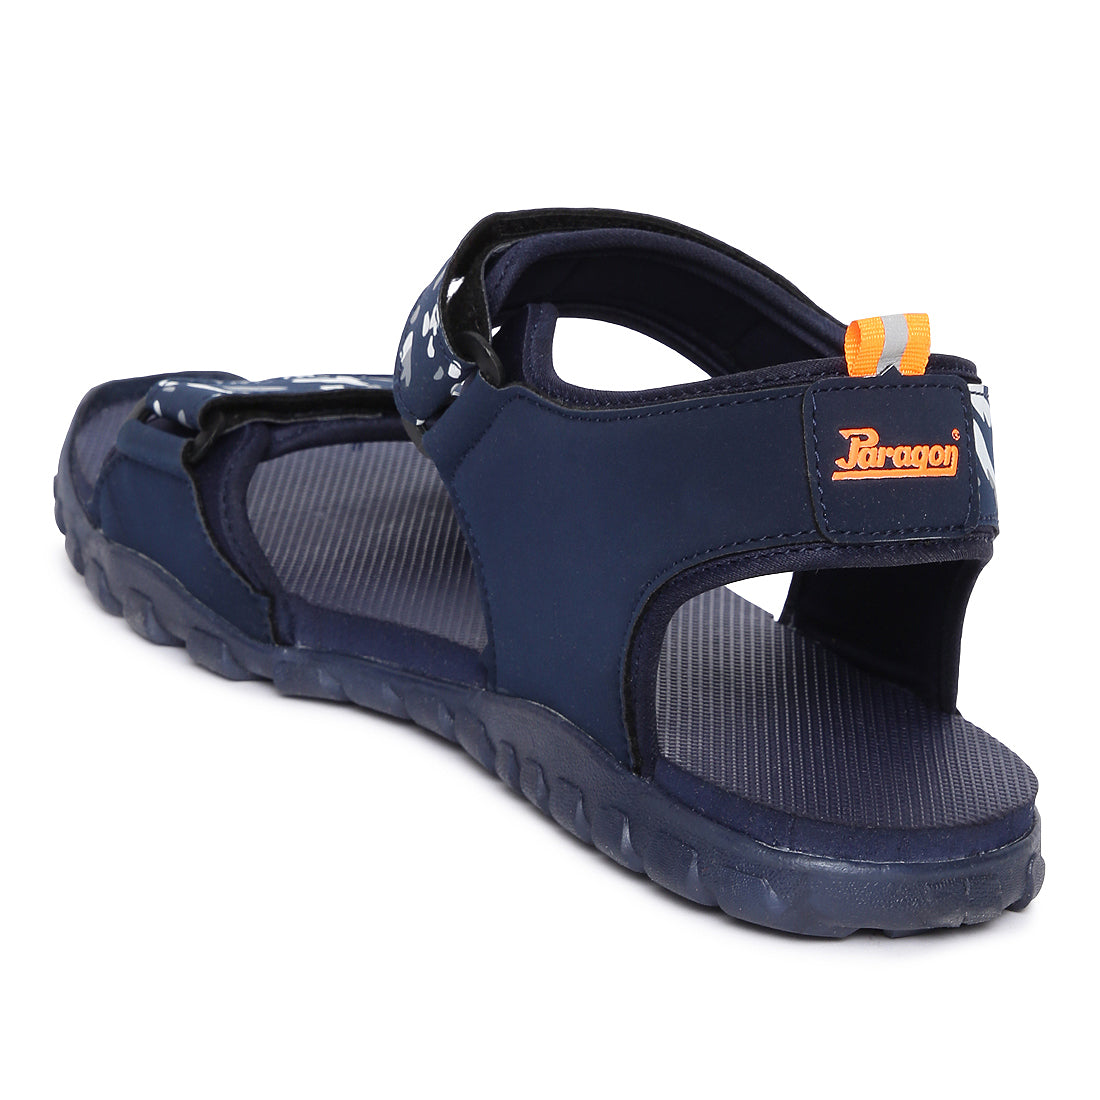 Paragon Blot K1406G Men Stylish Sandals | Comfortable Sandals for Daily Outdoor Use | Casual Formal Sandals with Cushioned Soles